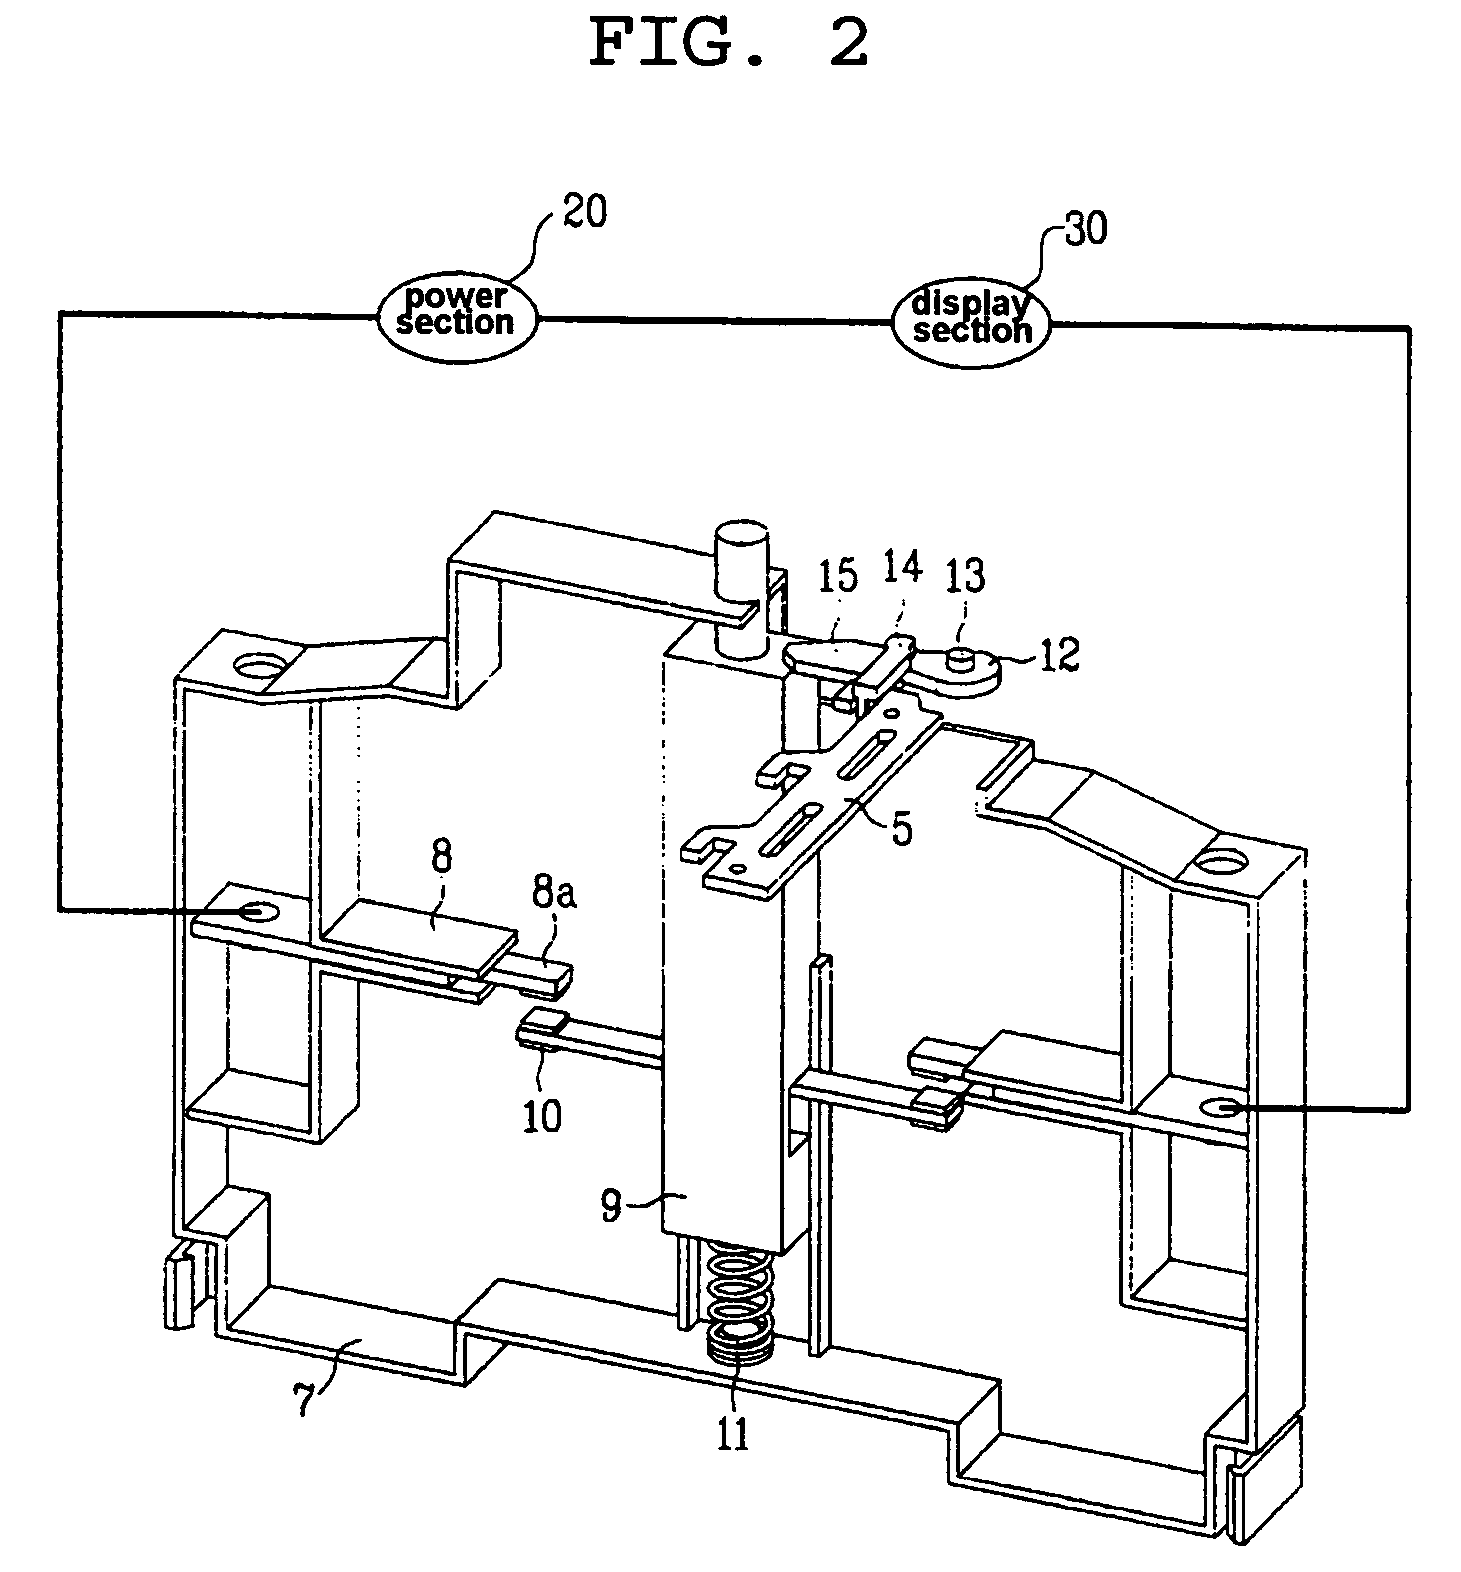 Phase deficiency display device for thermal magnetic type molded case circuit breaker